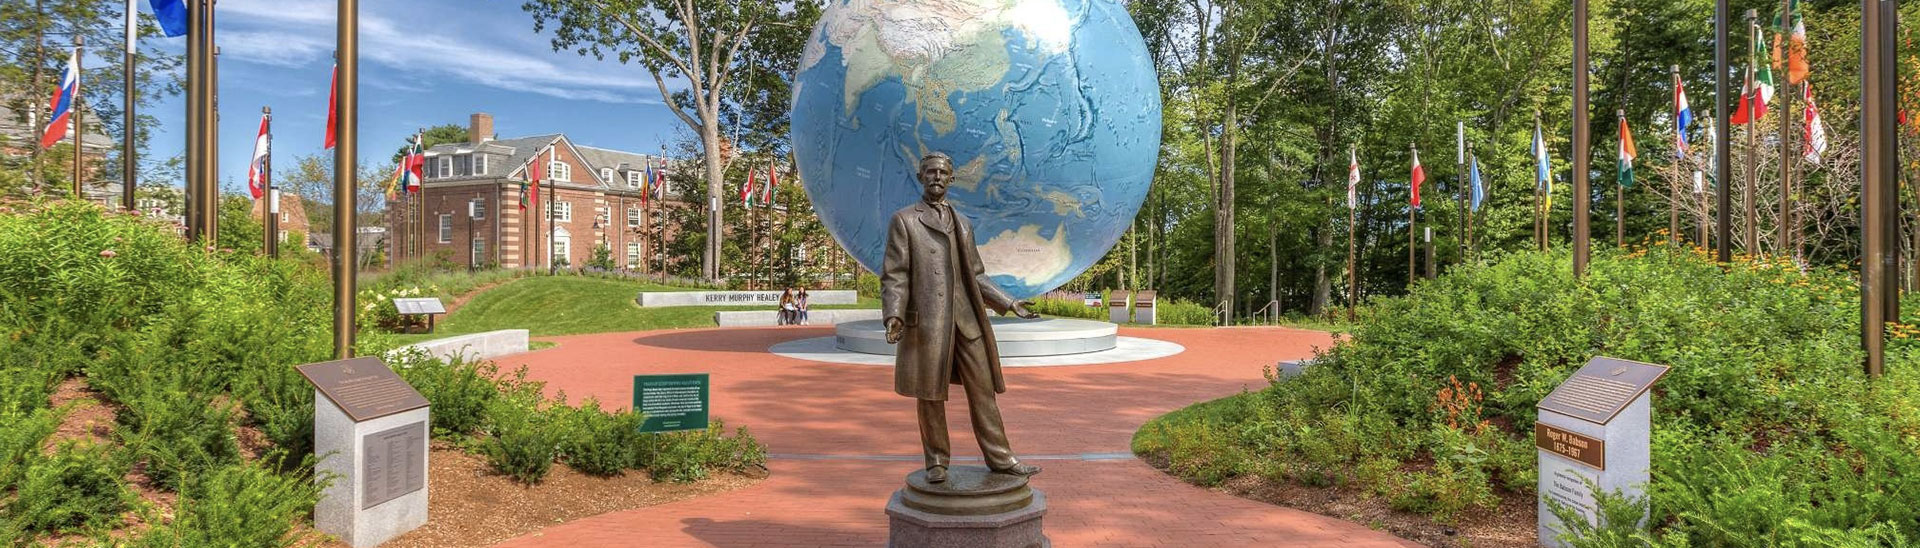 Babson Statue in front of the globe